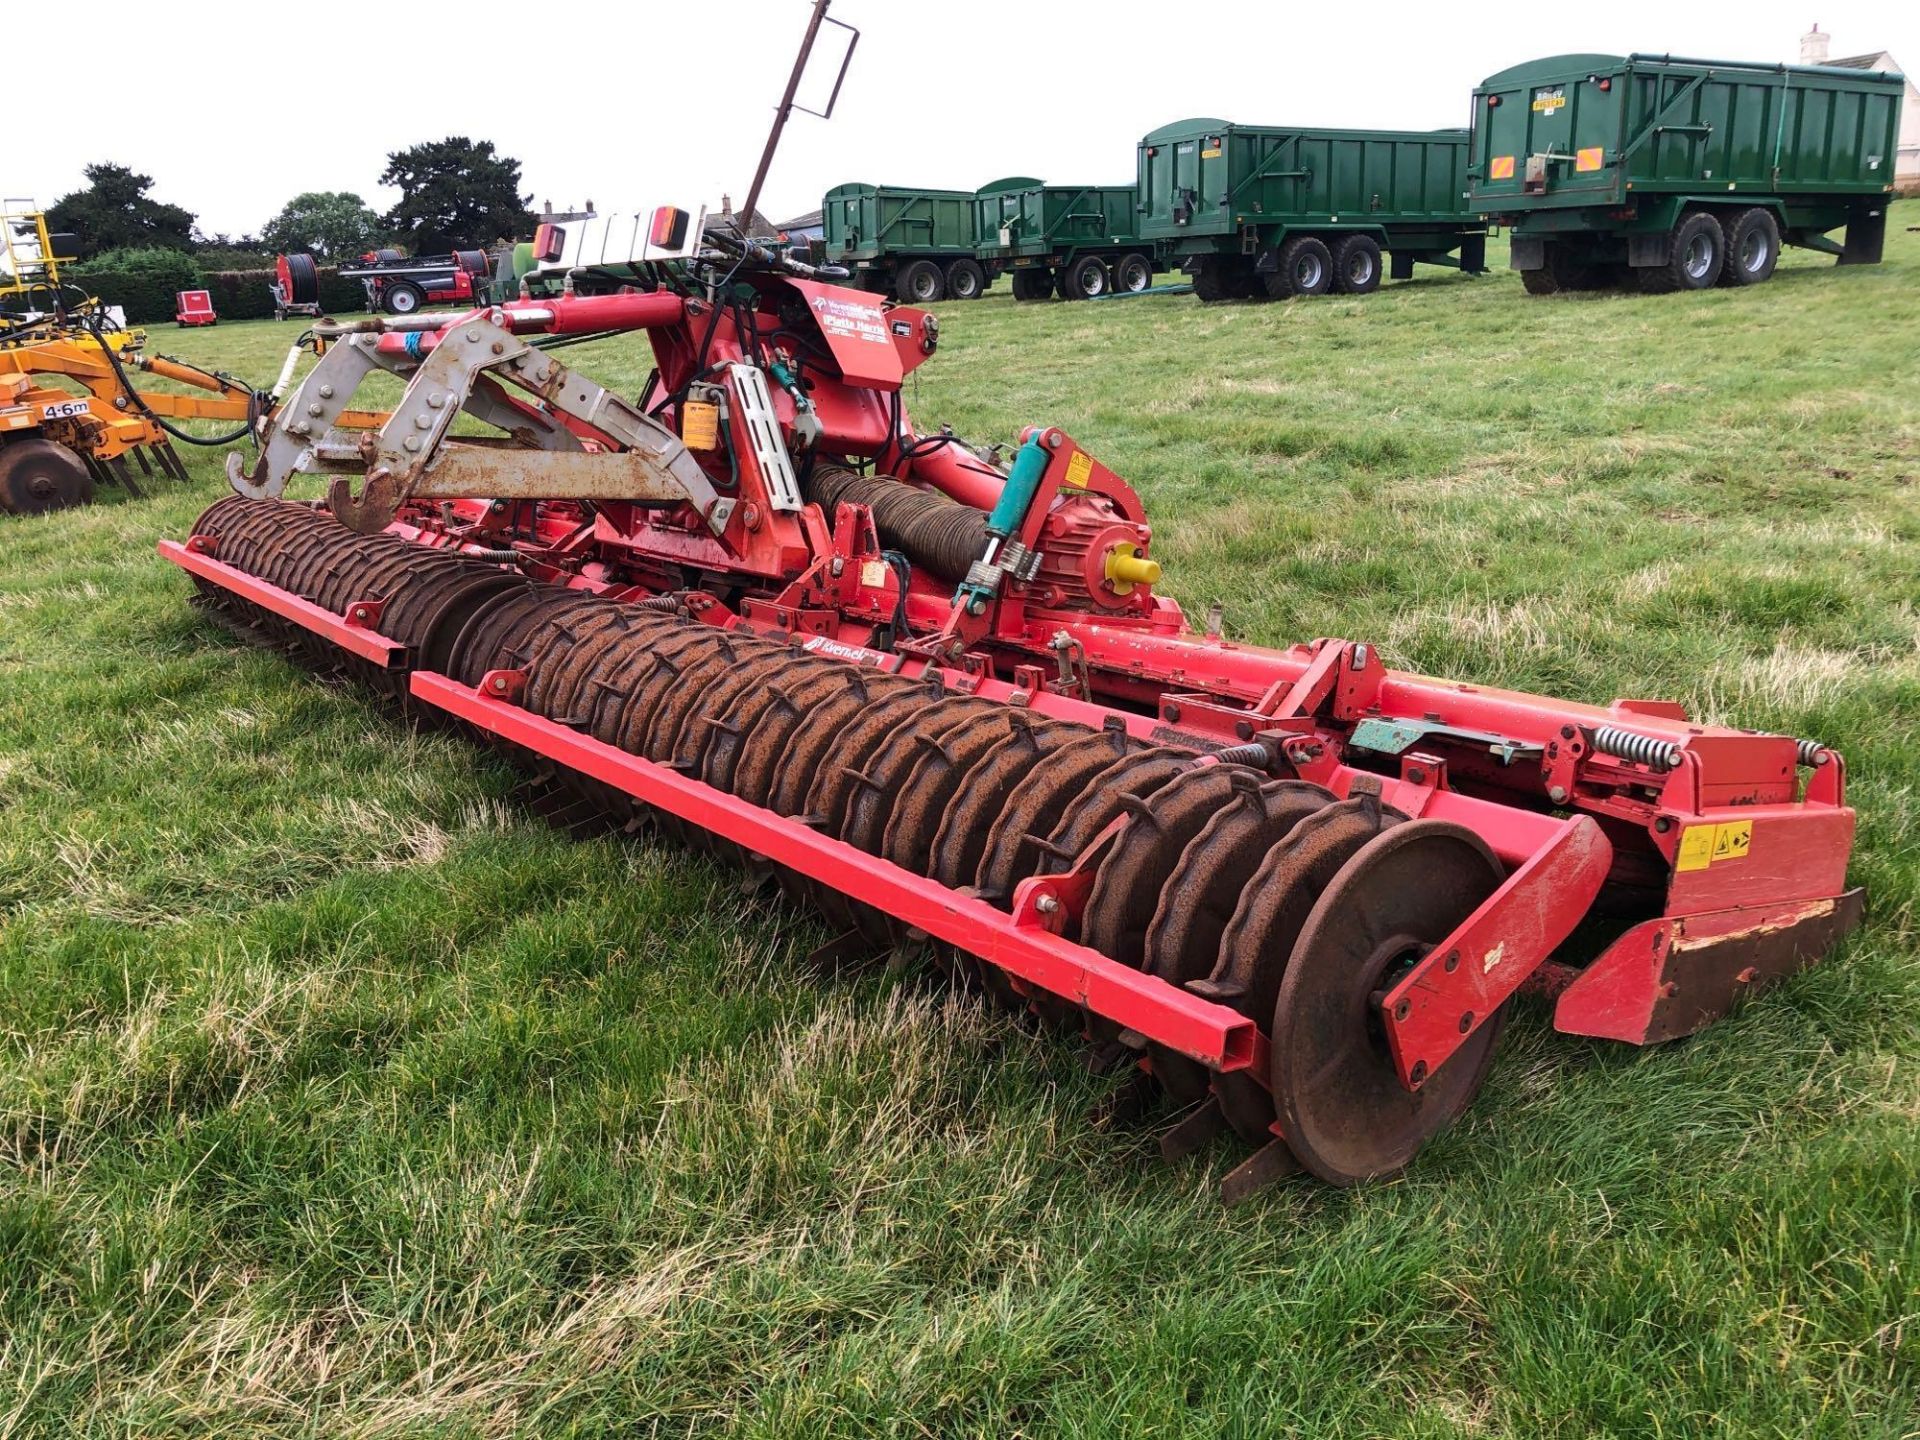 2008 Kverneland NGS/601/F40 6m hydraulic folding power harrow with rear Kerner packer and rear linka - Image 3 of 12